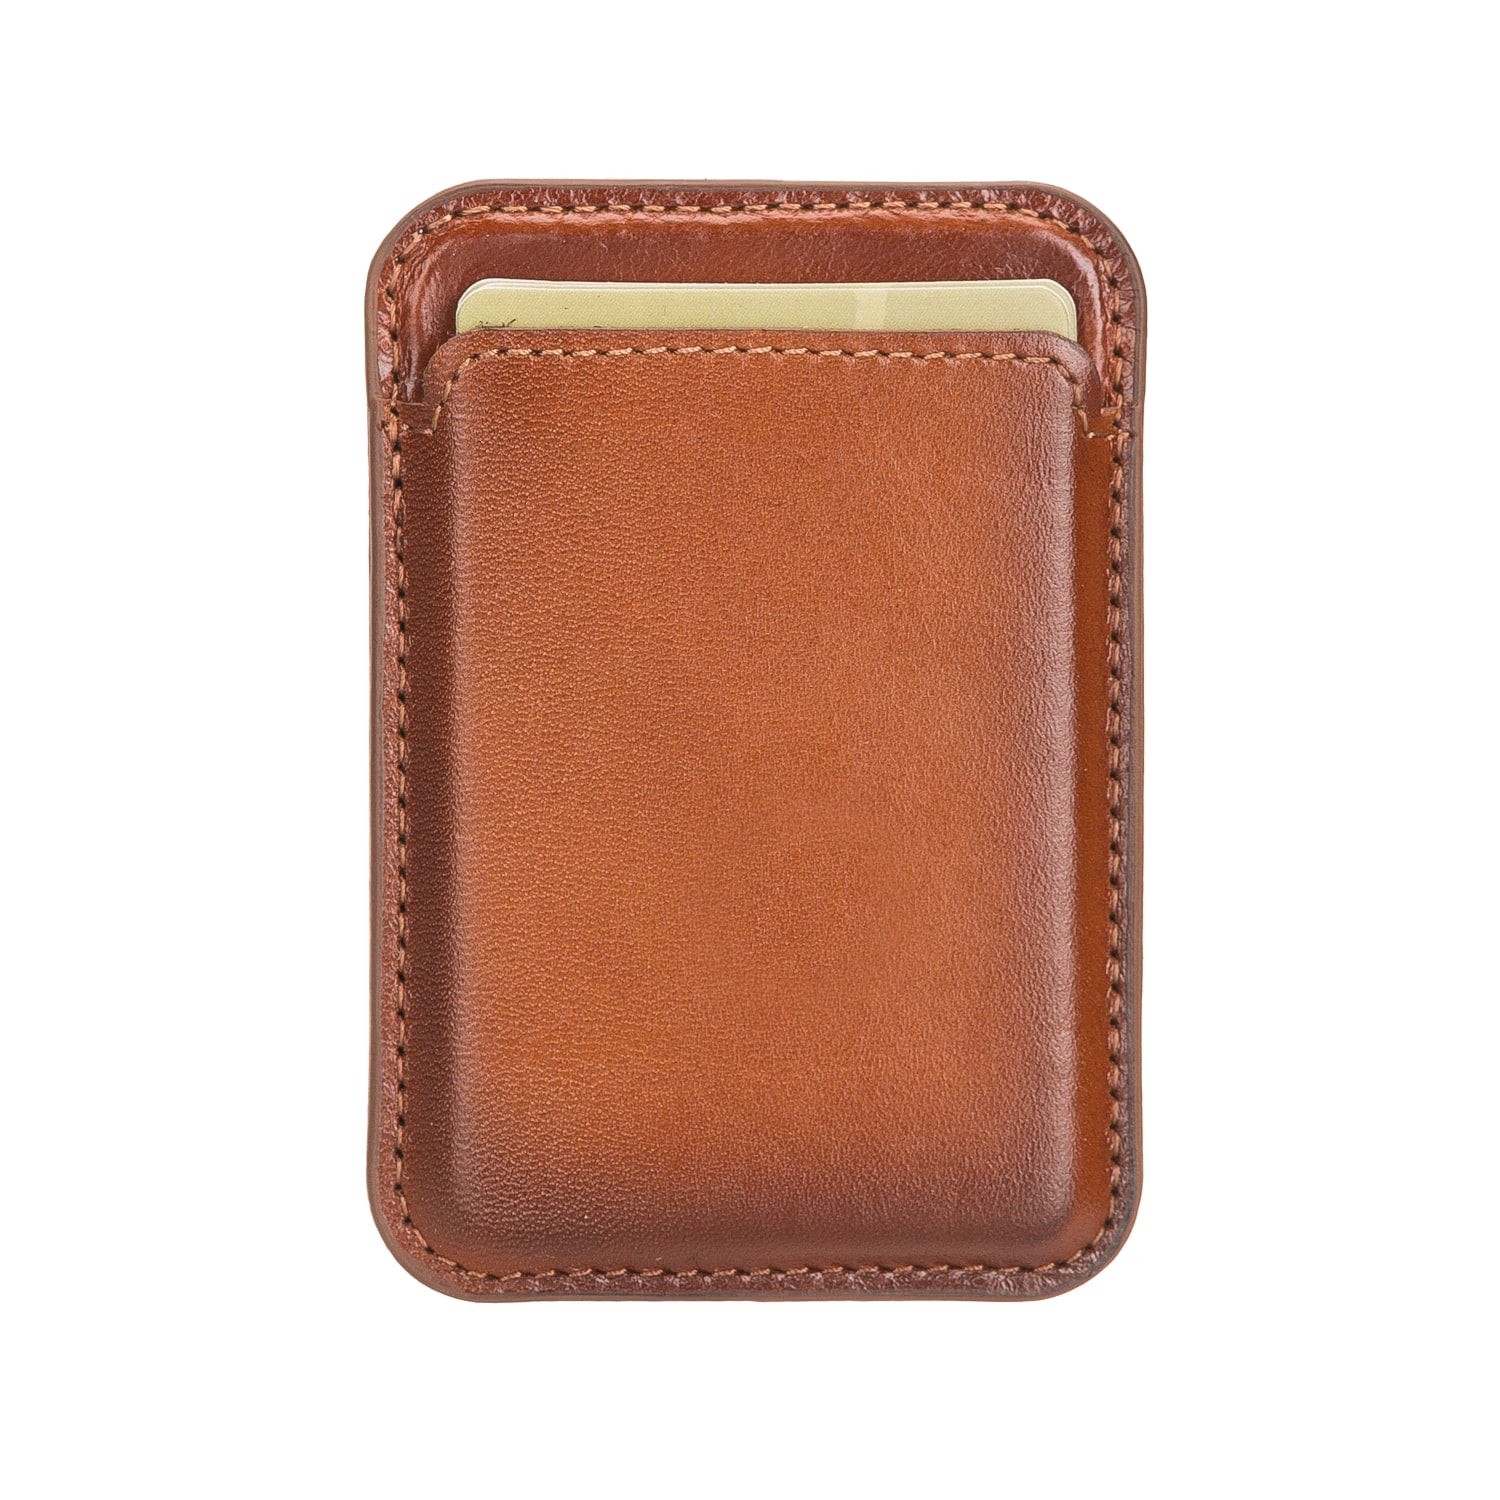 Brown Leather Apple MagSafe Card Holder Magnetic Wallet for iPhone - Bomonti - 4